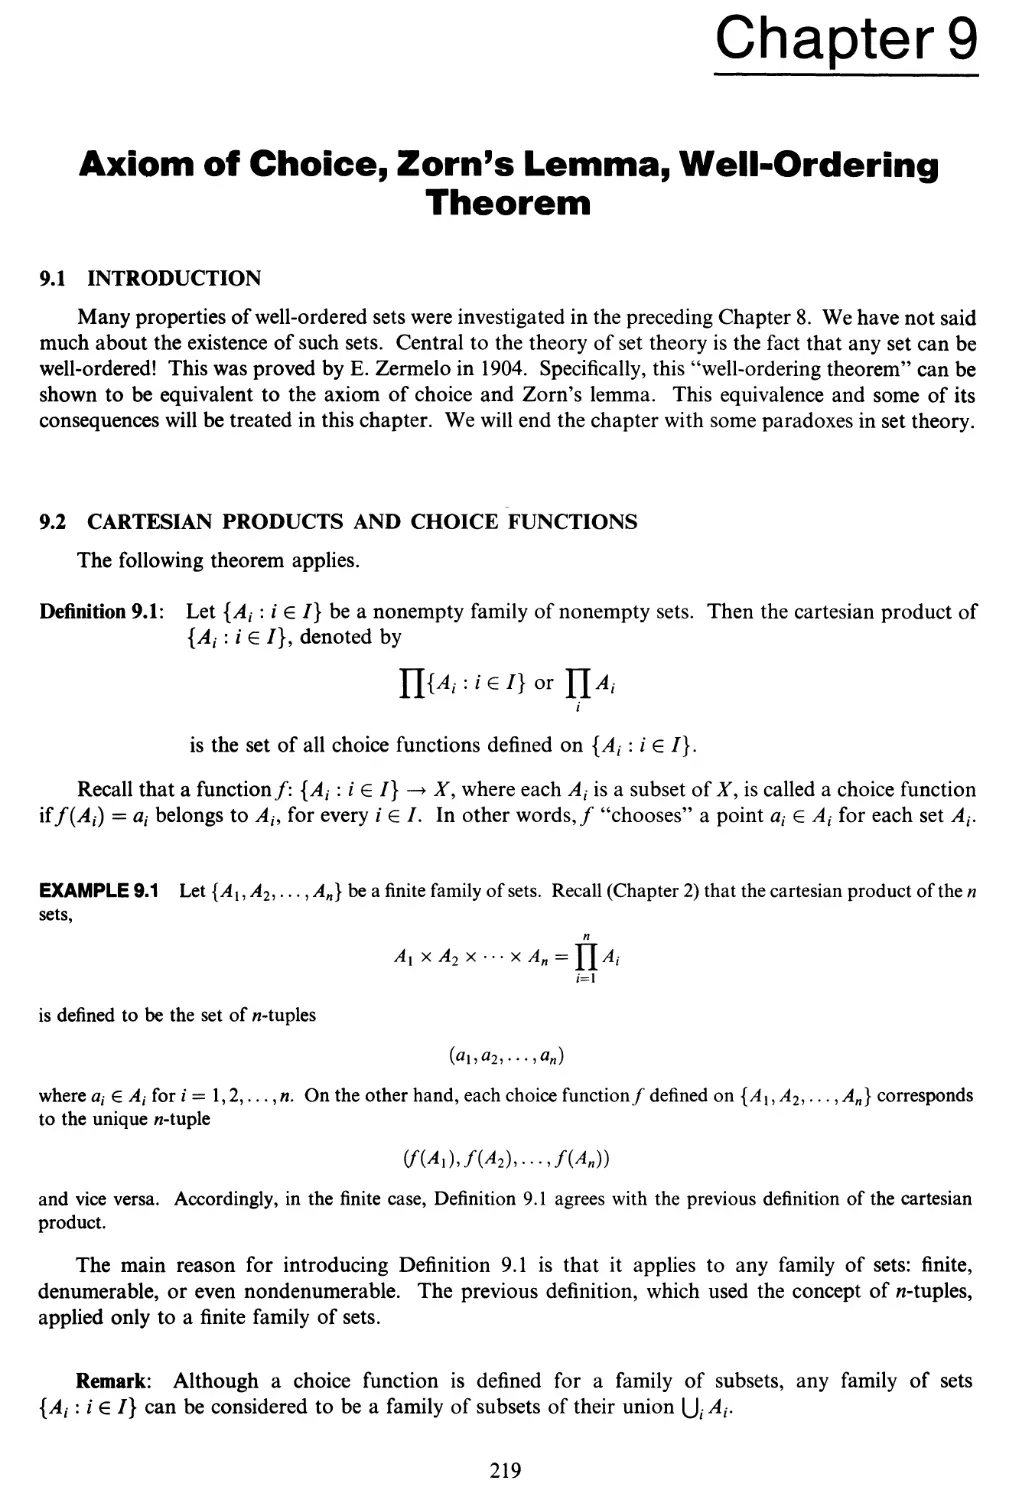 Chapter 9 AXIOM OF CHOICE, ZORN'S LEMMA, WELL-ORDERING THEOREM
9.2 Cartesian products and choice functions